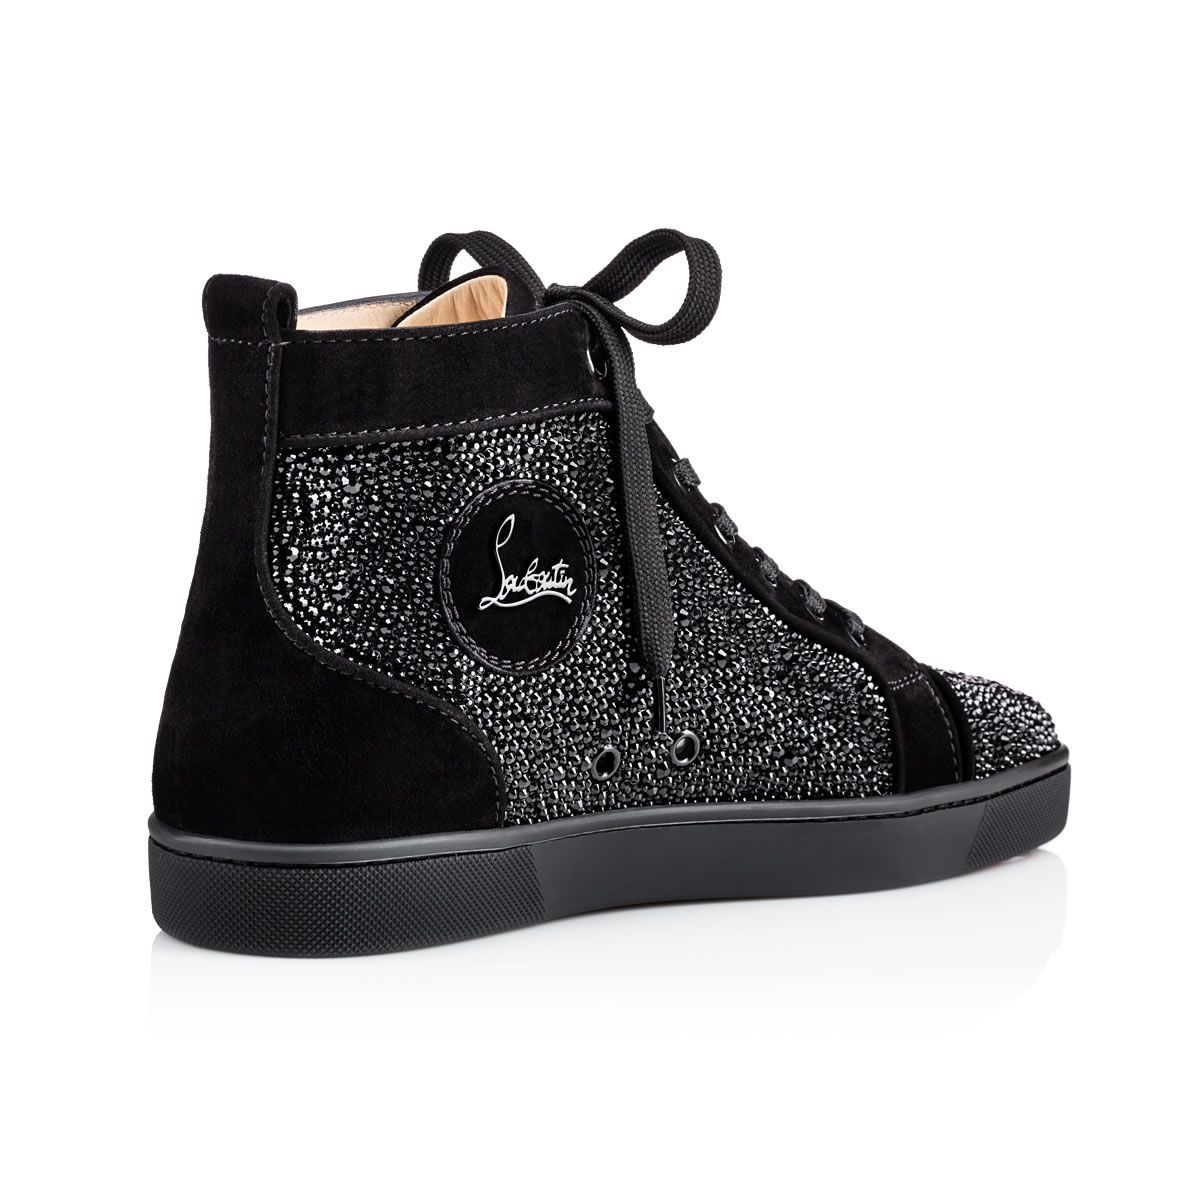 Astroloubi Strass - Sneakers - Veau velours, suede, leather Comete and  strass - Black - Christian Louboutin